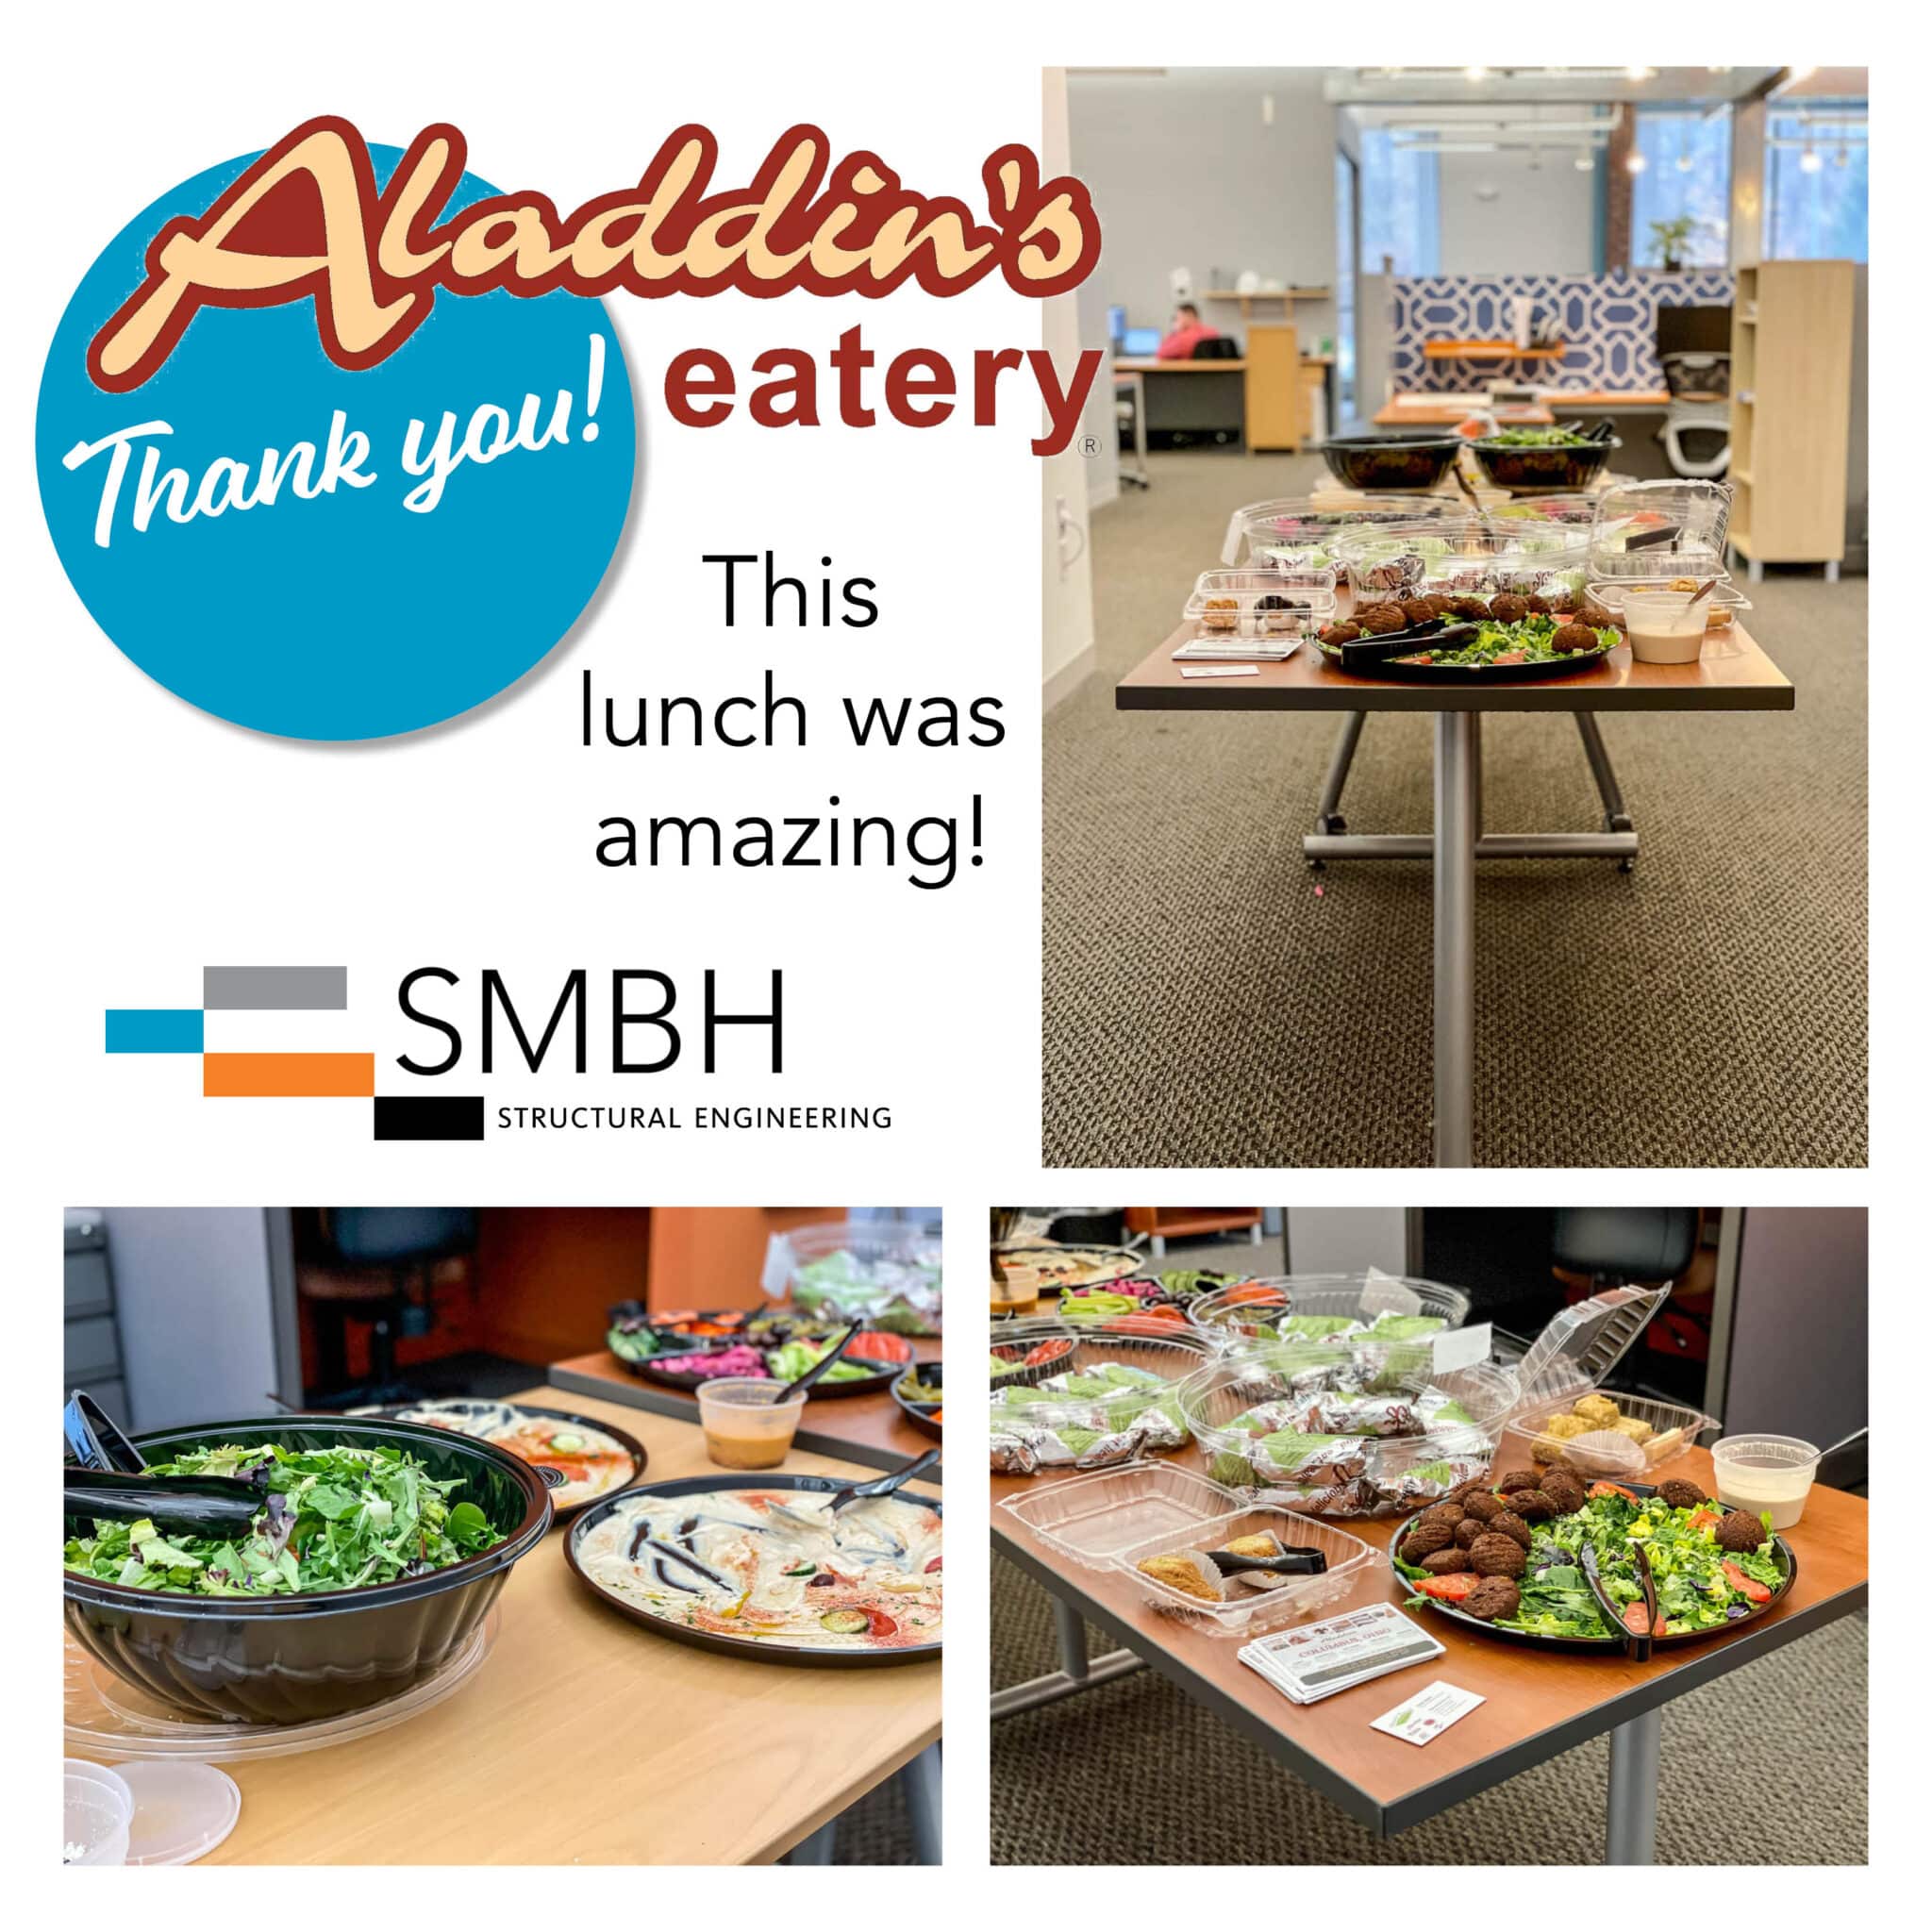 A series of images showing a catered lunch on tables in the SMBH office. Aladdin's of Grandview provided the food shown.